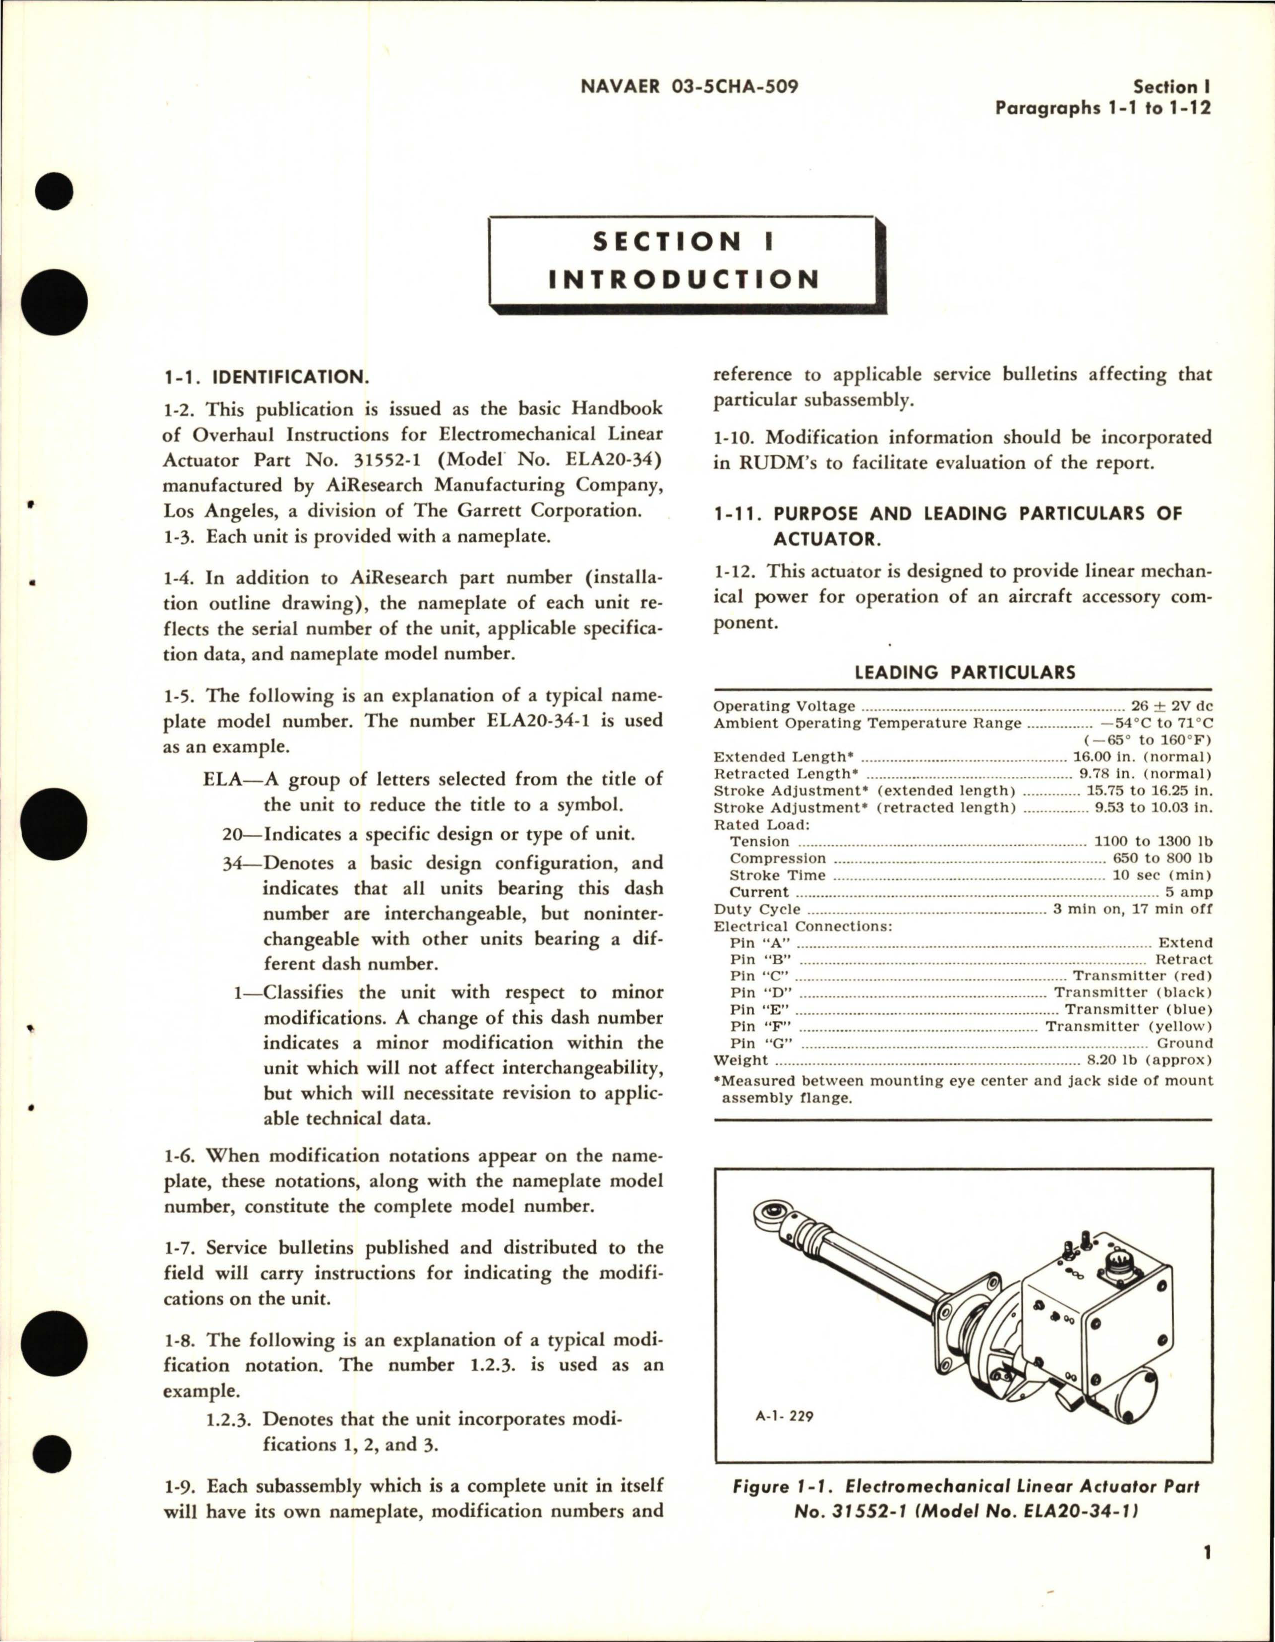 Sample page 5 from AirCorps Library document: Overhaul Instructions for Electromechanical Linear Actuator - Part 31552-1 - Model ELA20-34